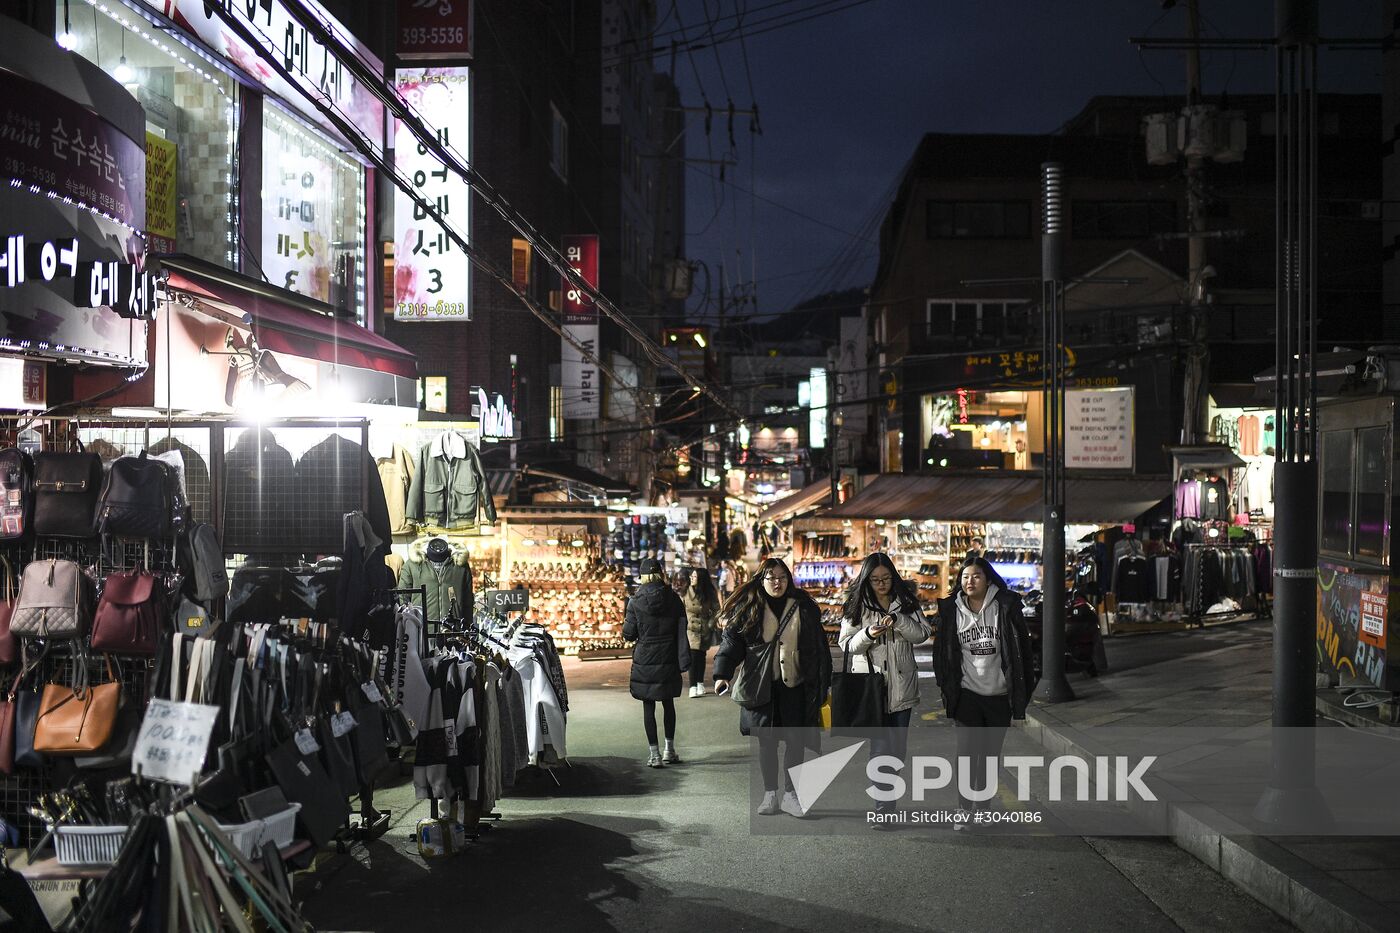 Cities of the world. Seoul